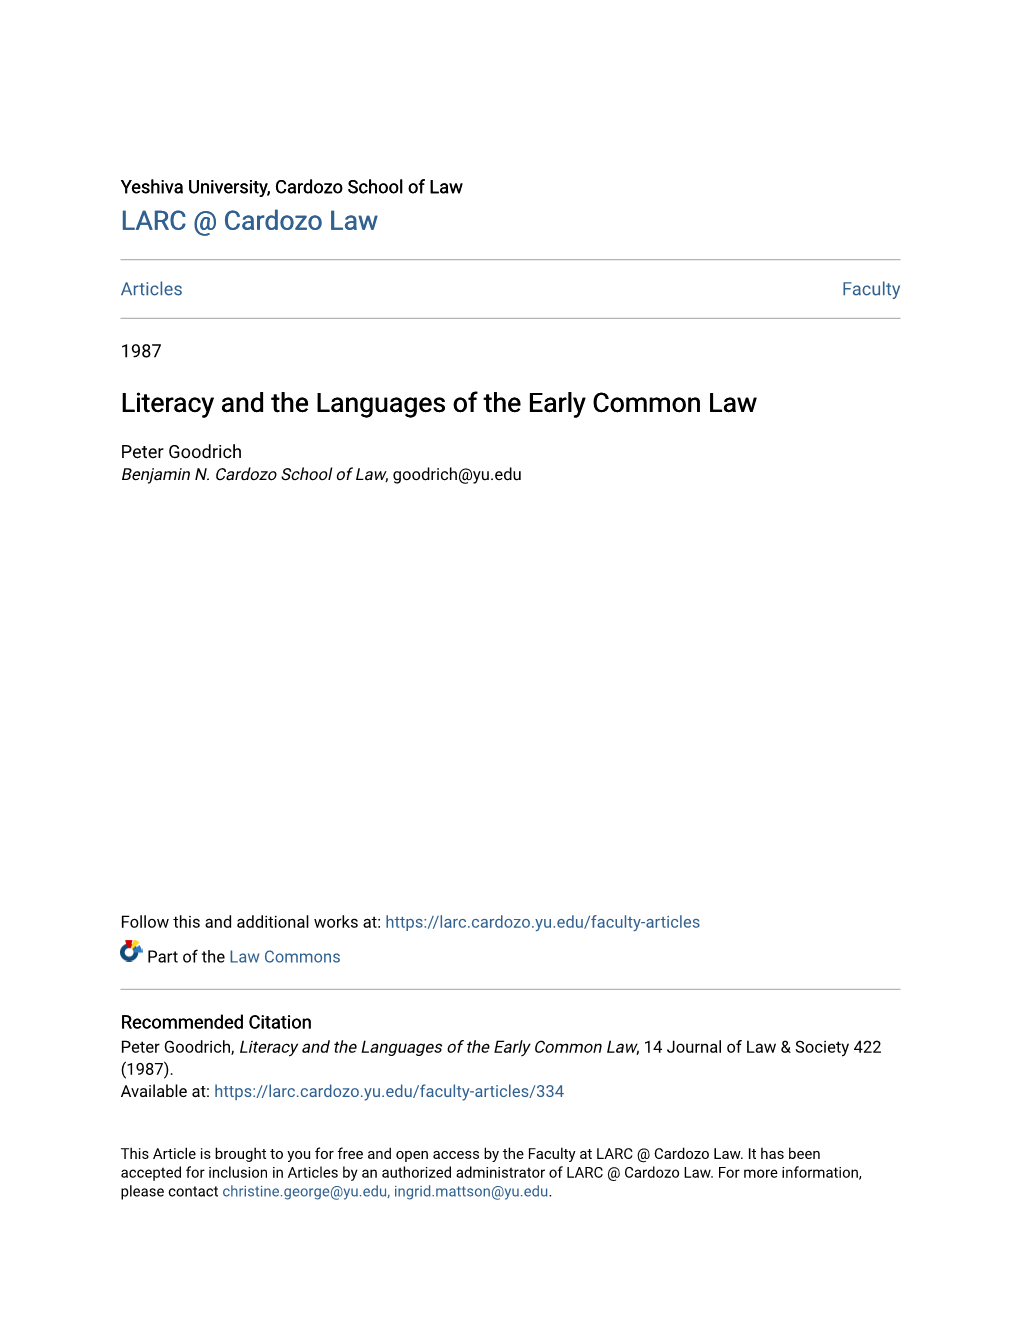 Literacy and the Languages of the Early Common Law